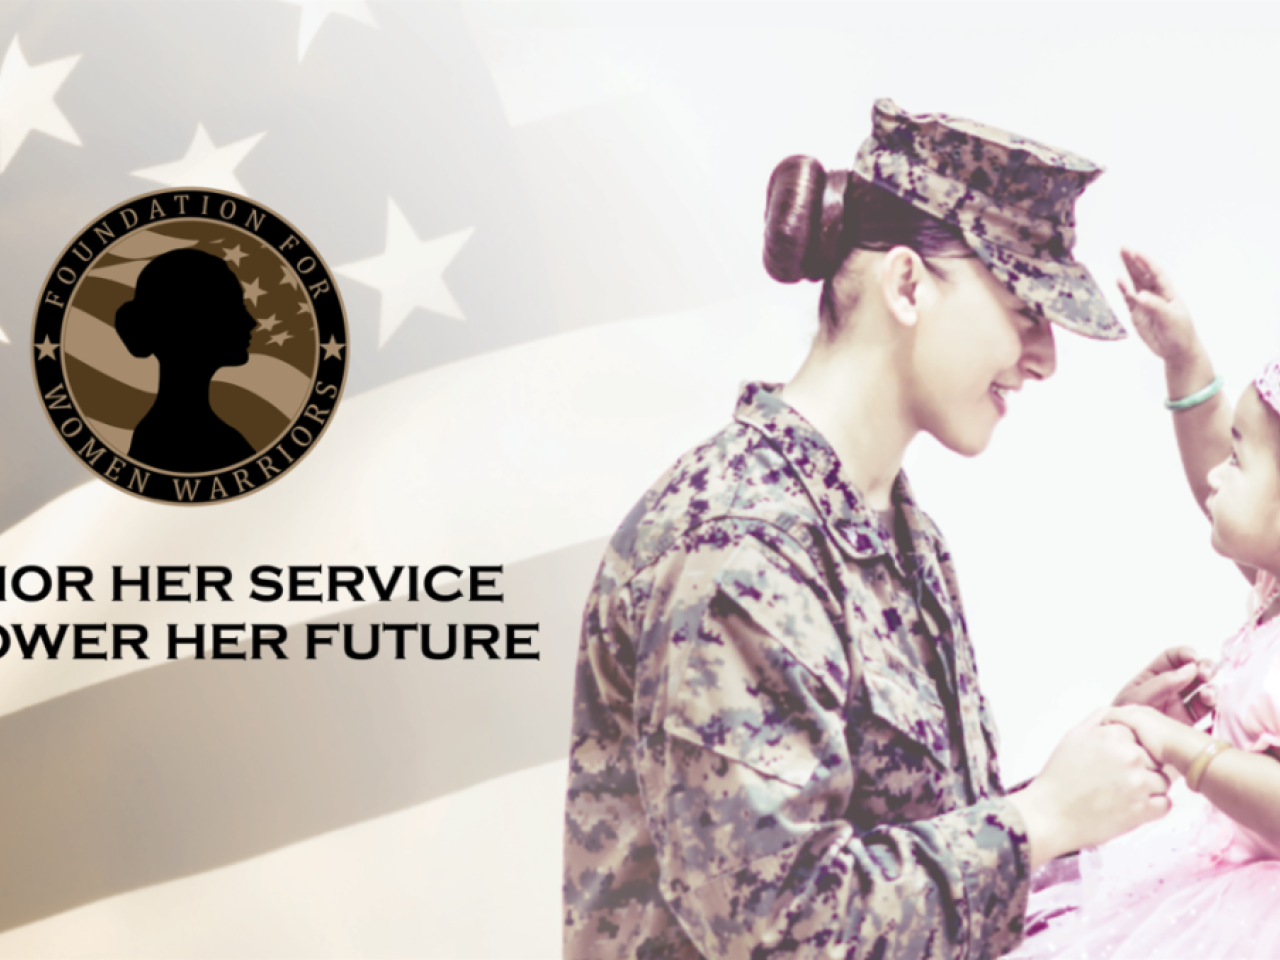 A service woman is shown with her young daughter in front of an American flag with the Foundation for Women Warriors logo. 